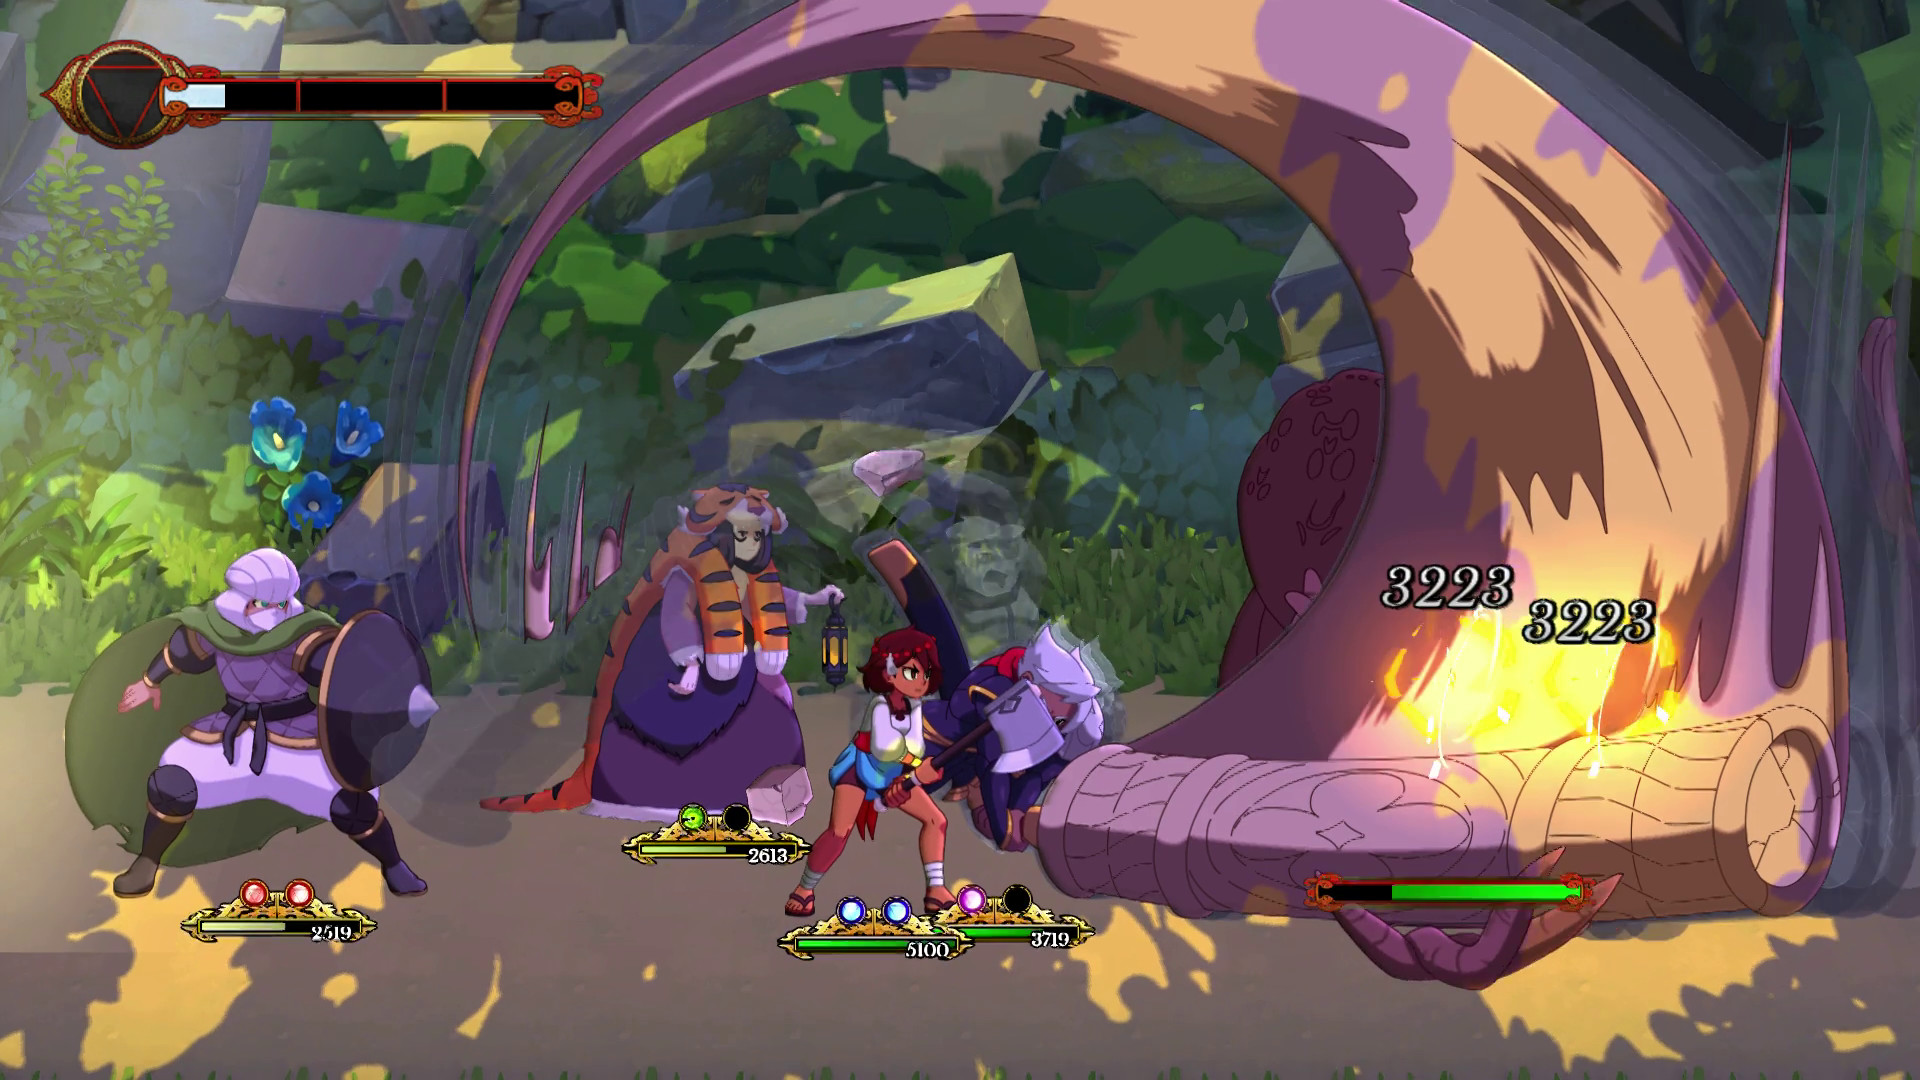 Indivisible on Steam